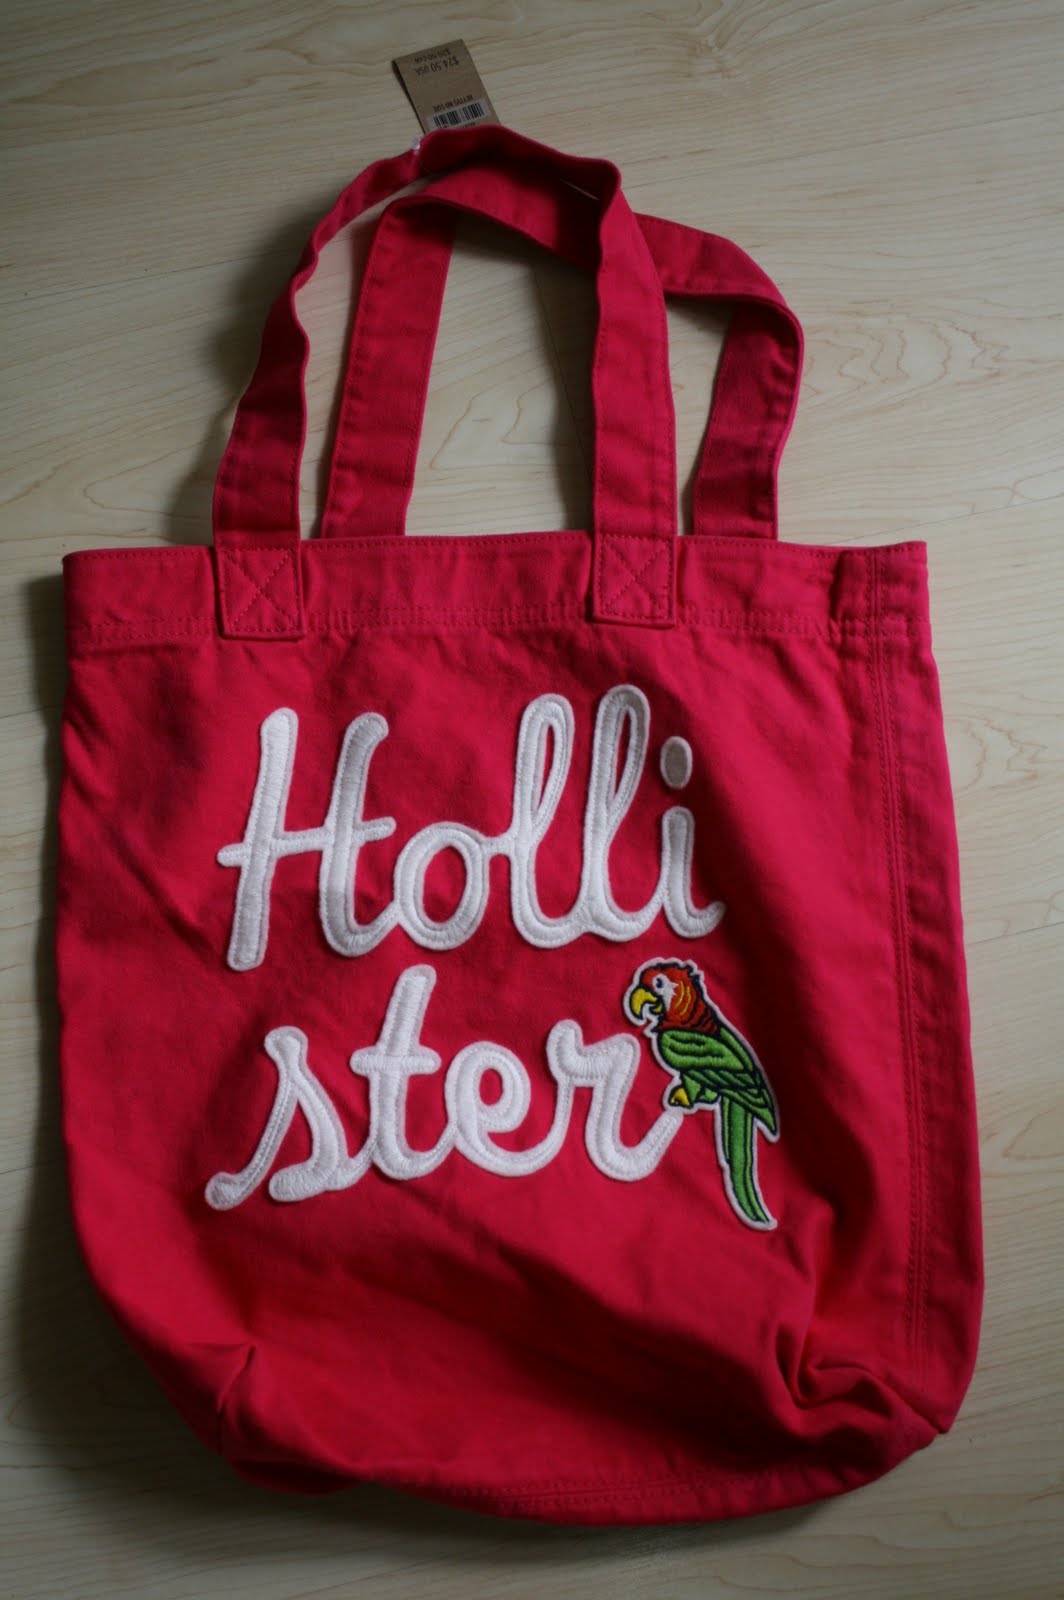 Everything must go...: HOLLISTER BAGS